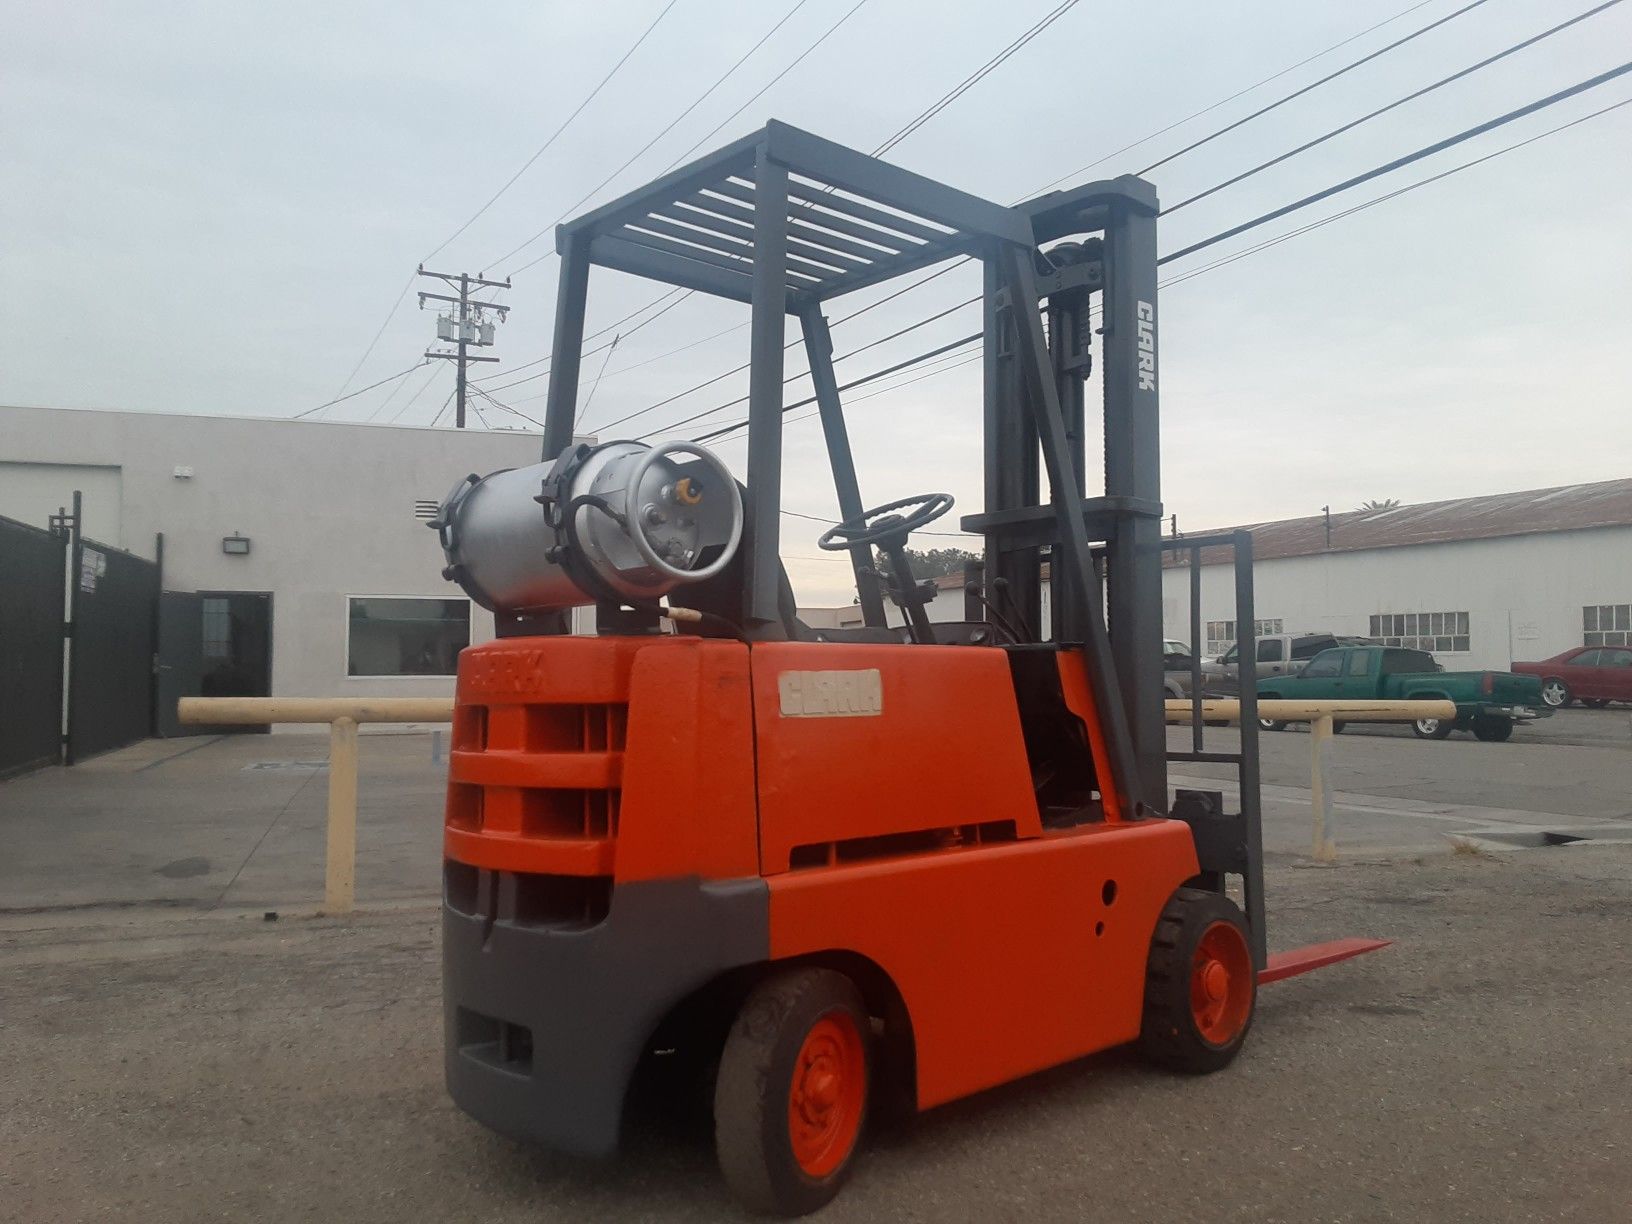 FORKLIFT "CLARK" 4500-LB CAPACITY $2,590!!!! AUTOMATIC %100 ISSUE FREE!!!! $2,590